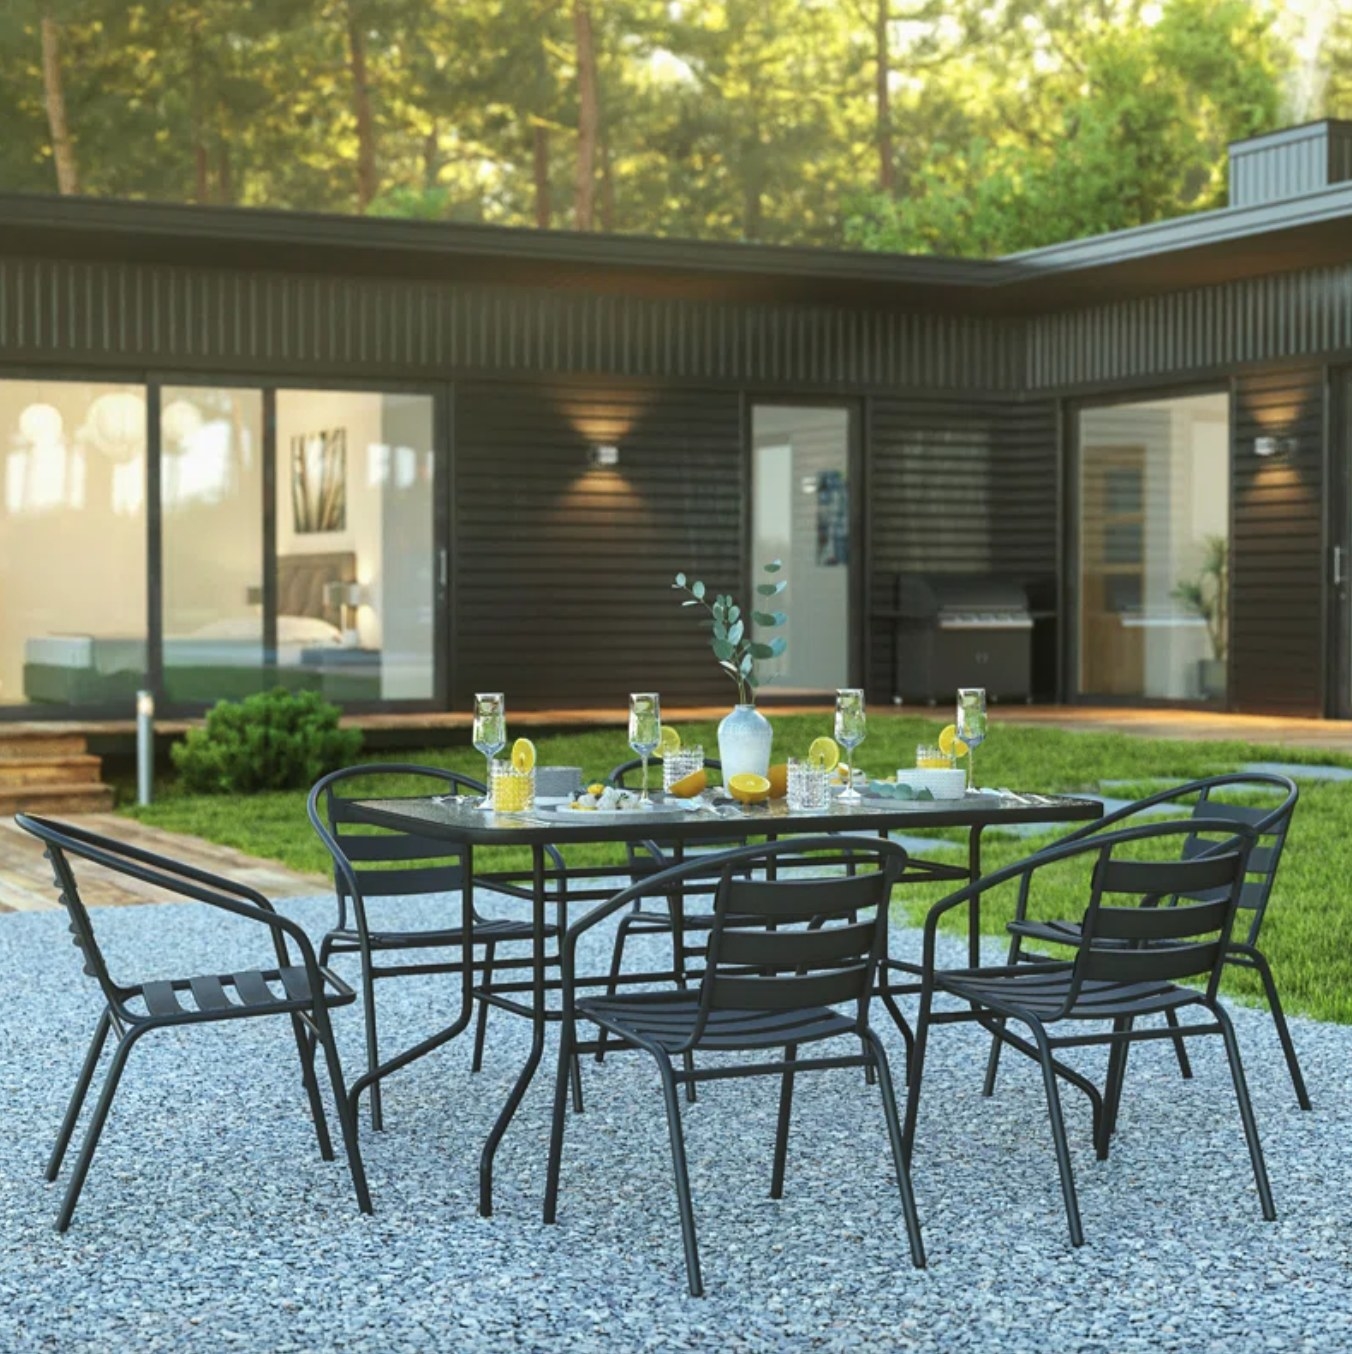 the black metal chairs and glass topped table in a decorated outdoor space